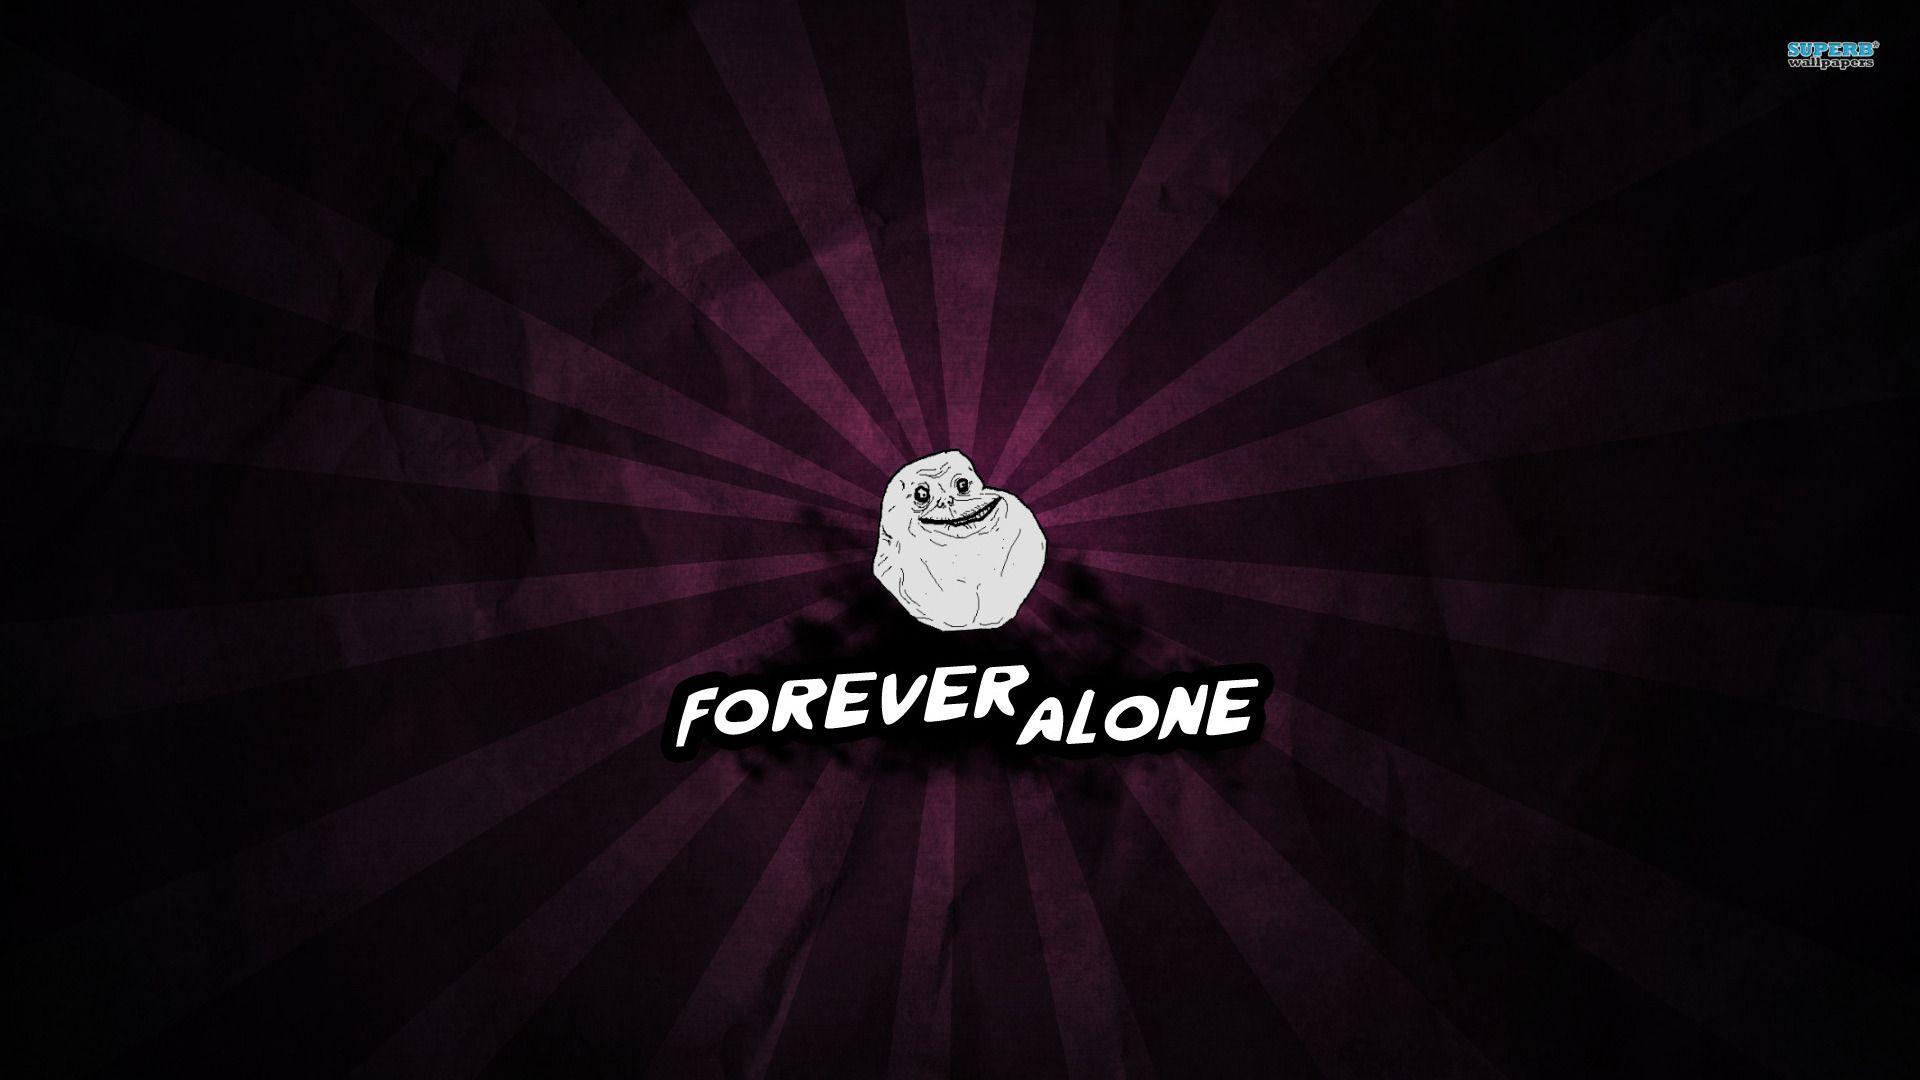 Forever alone wallpapers